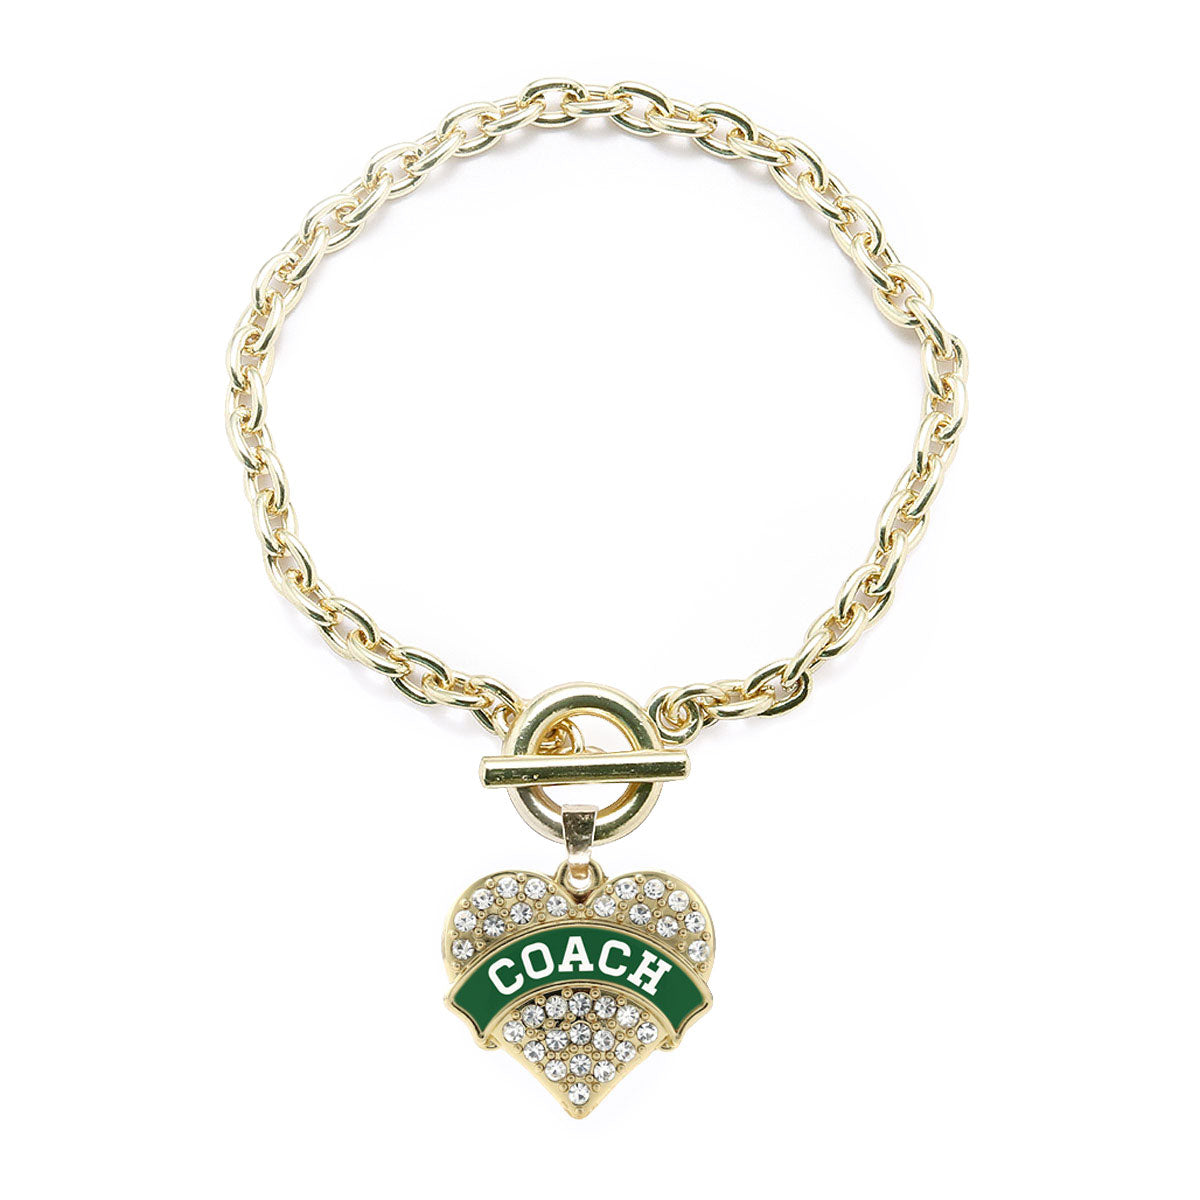 Gold Coach - Forest Green and White Pave Heart Charm Toggle Bracelet